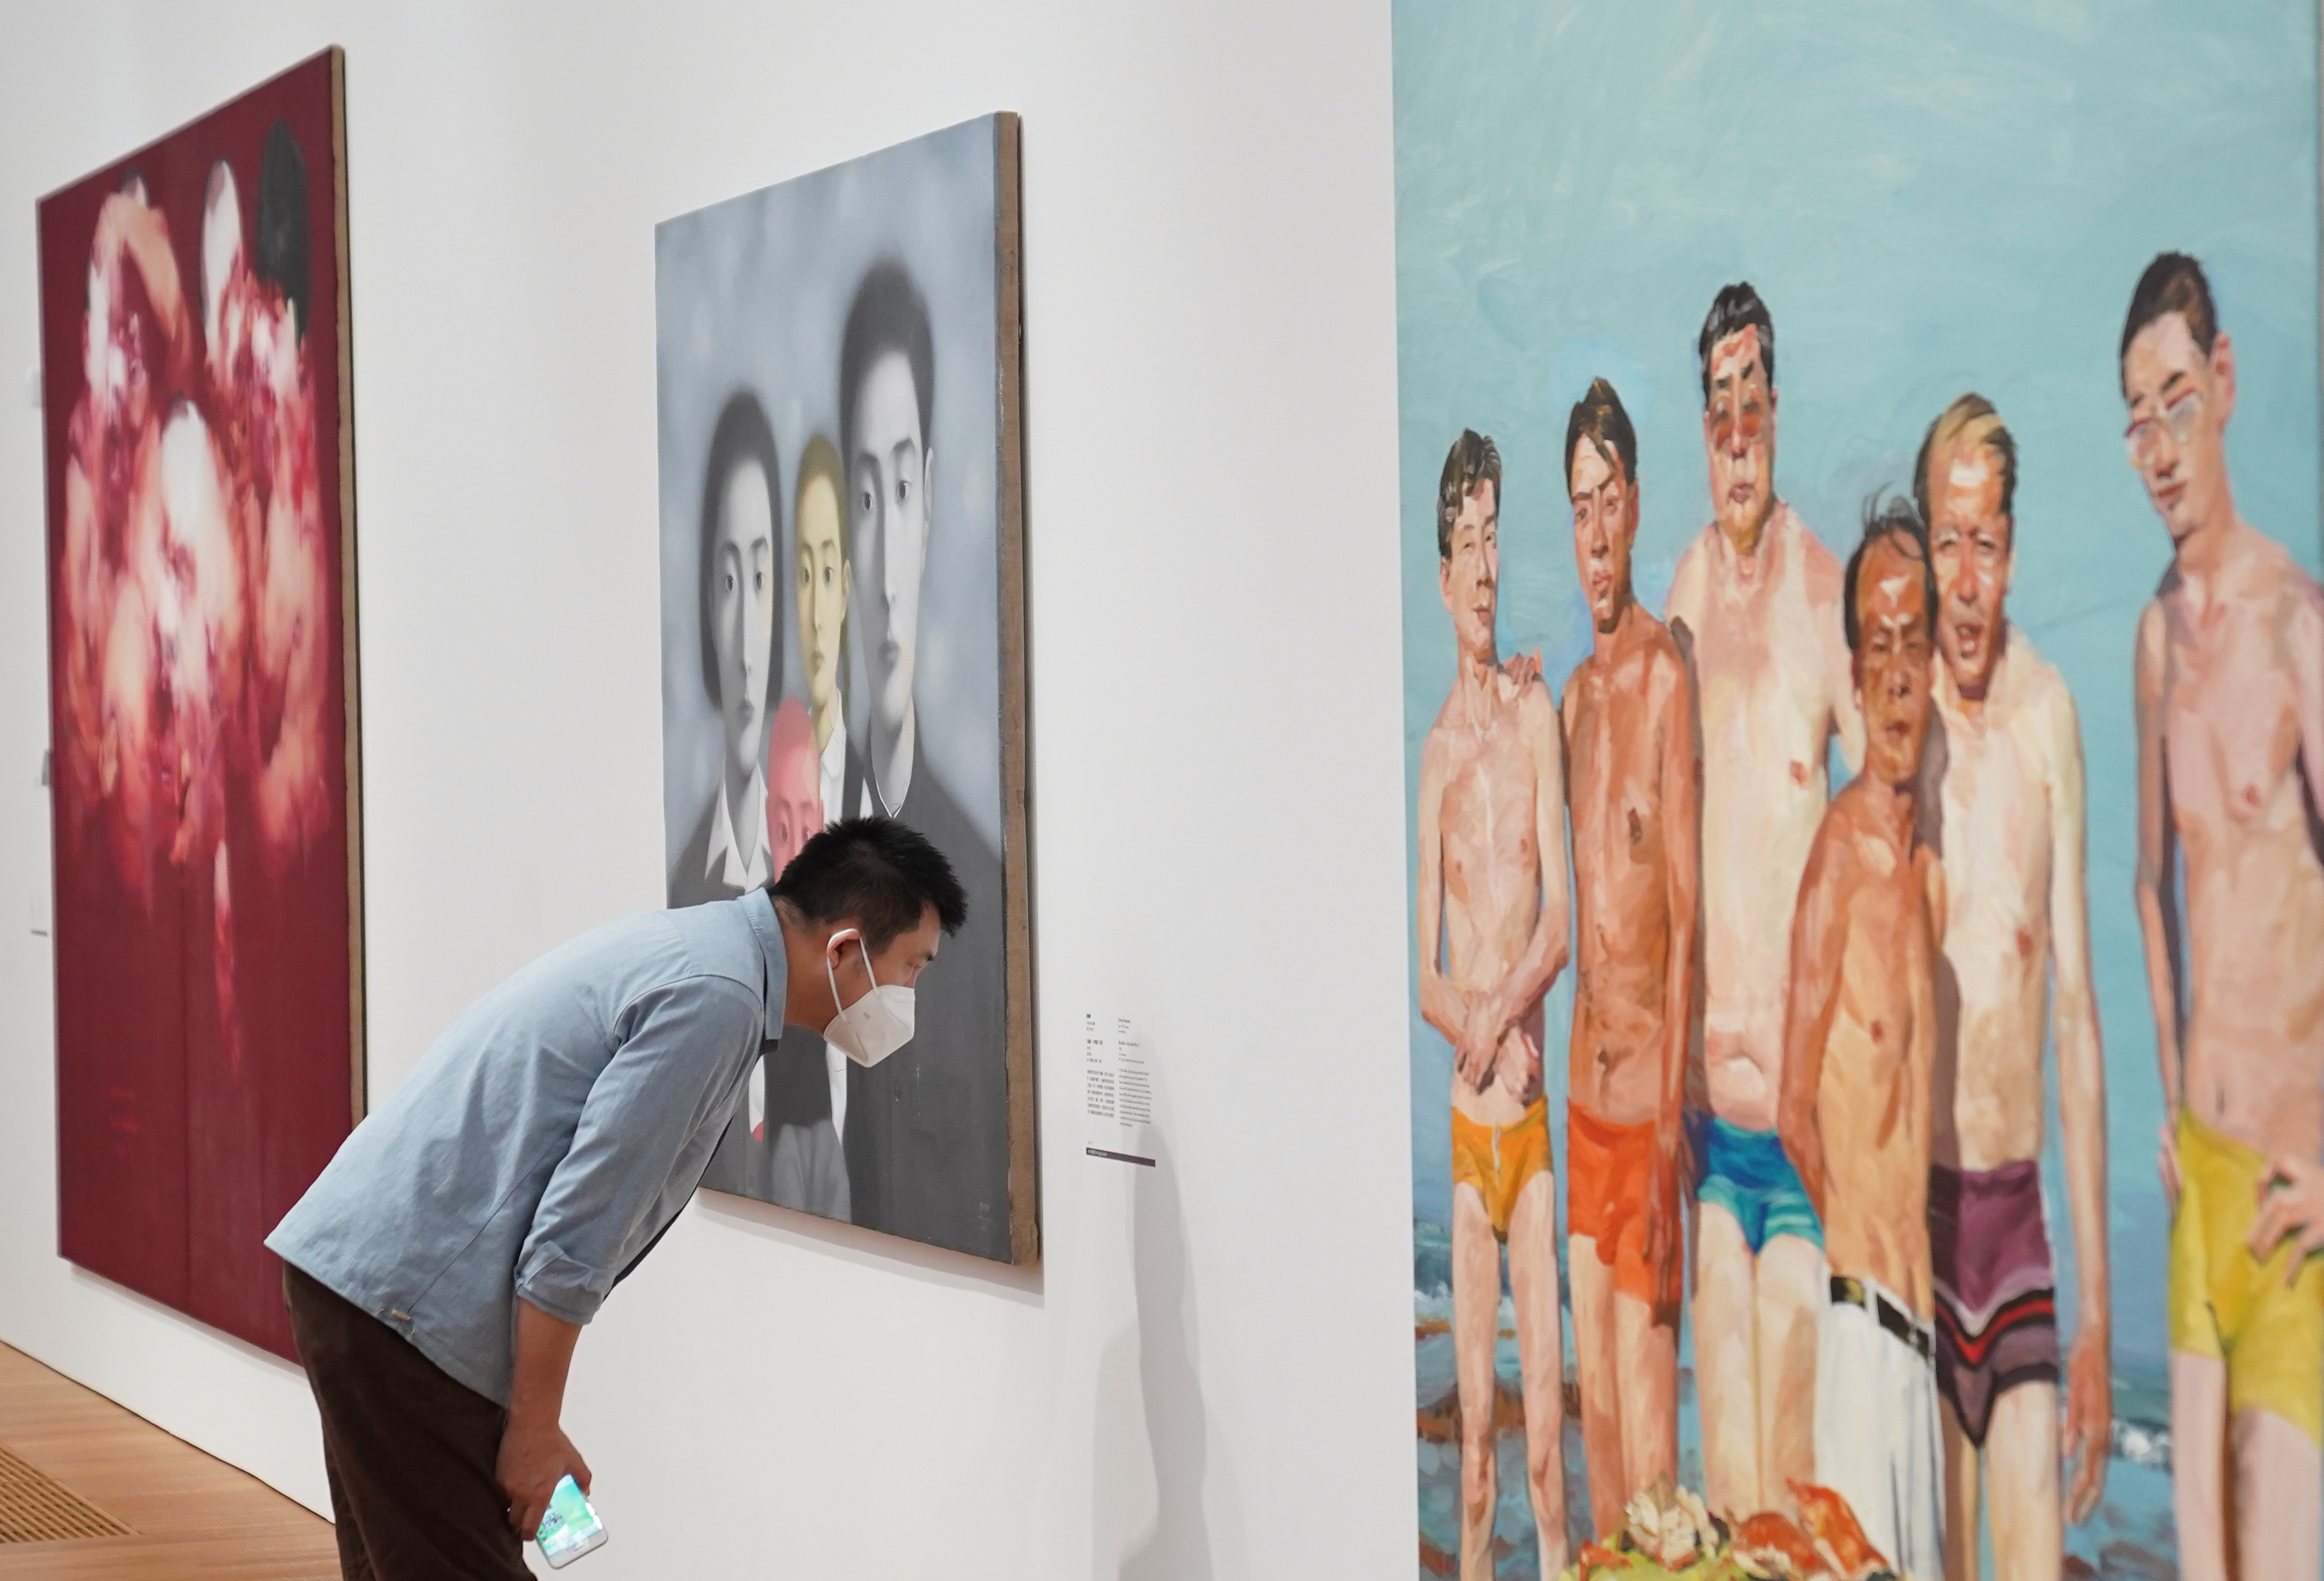 A visitor reads information about a painting at the M+ Museum in Hong Kong’s West Kowloon Cultural District. Photo: Sam Tsang